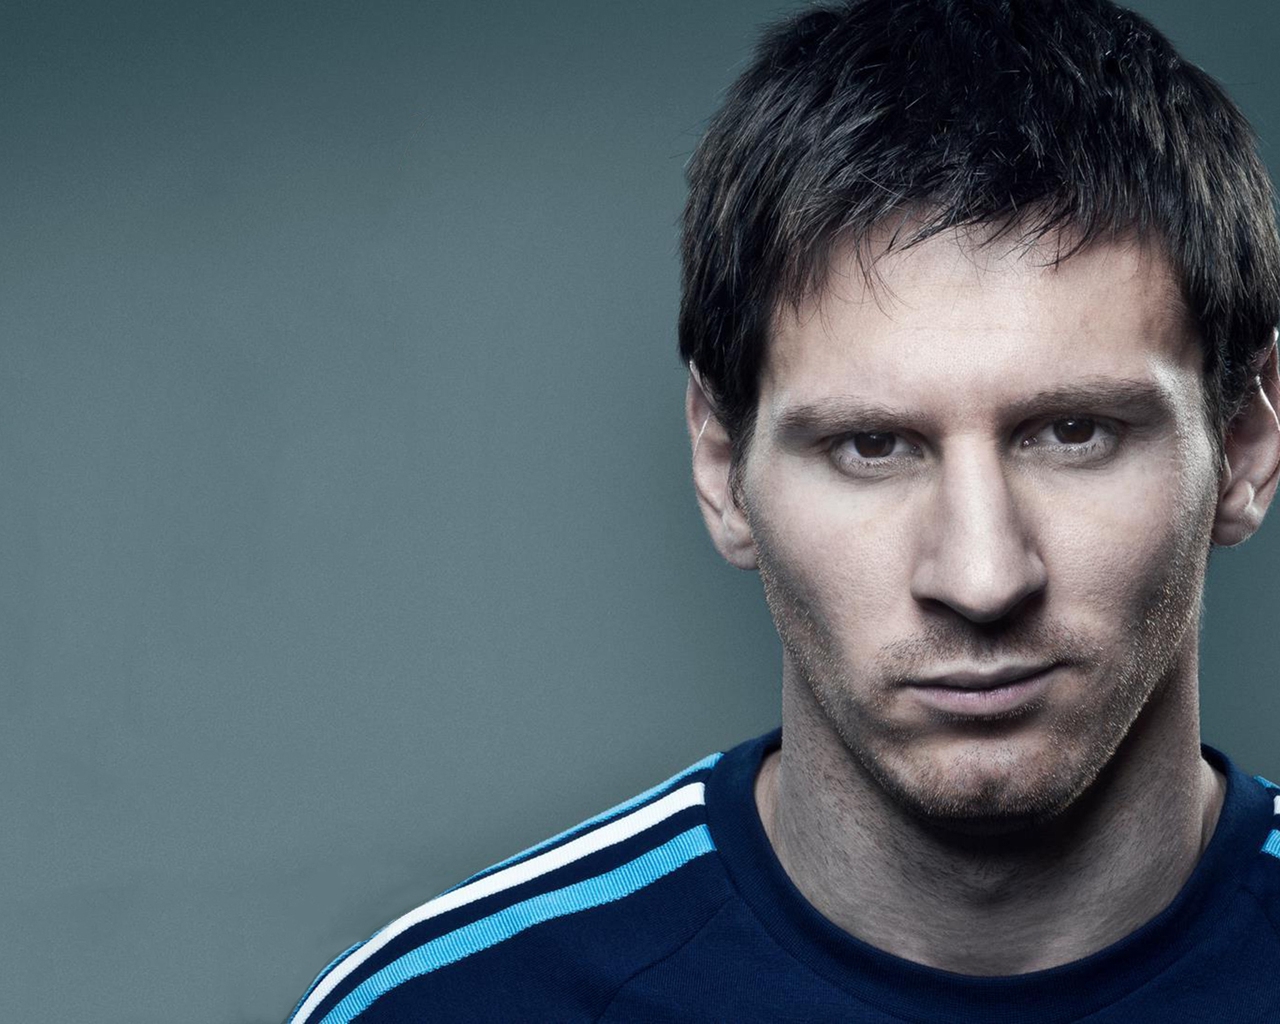 Messi Pose for 1280 x 1024 resolution